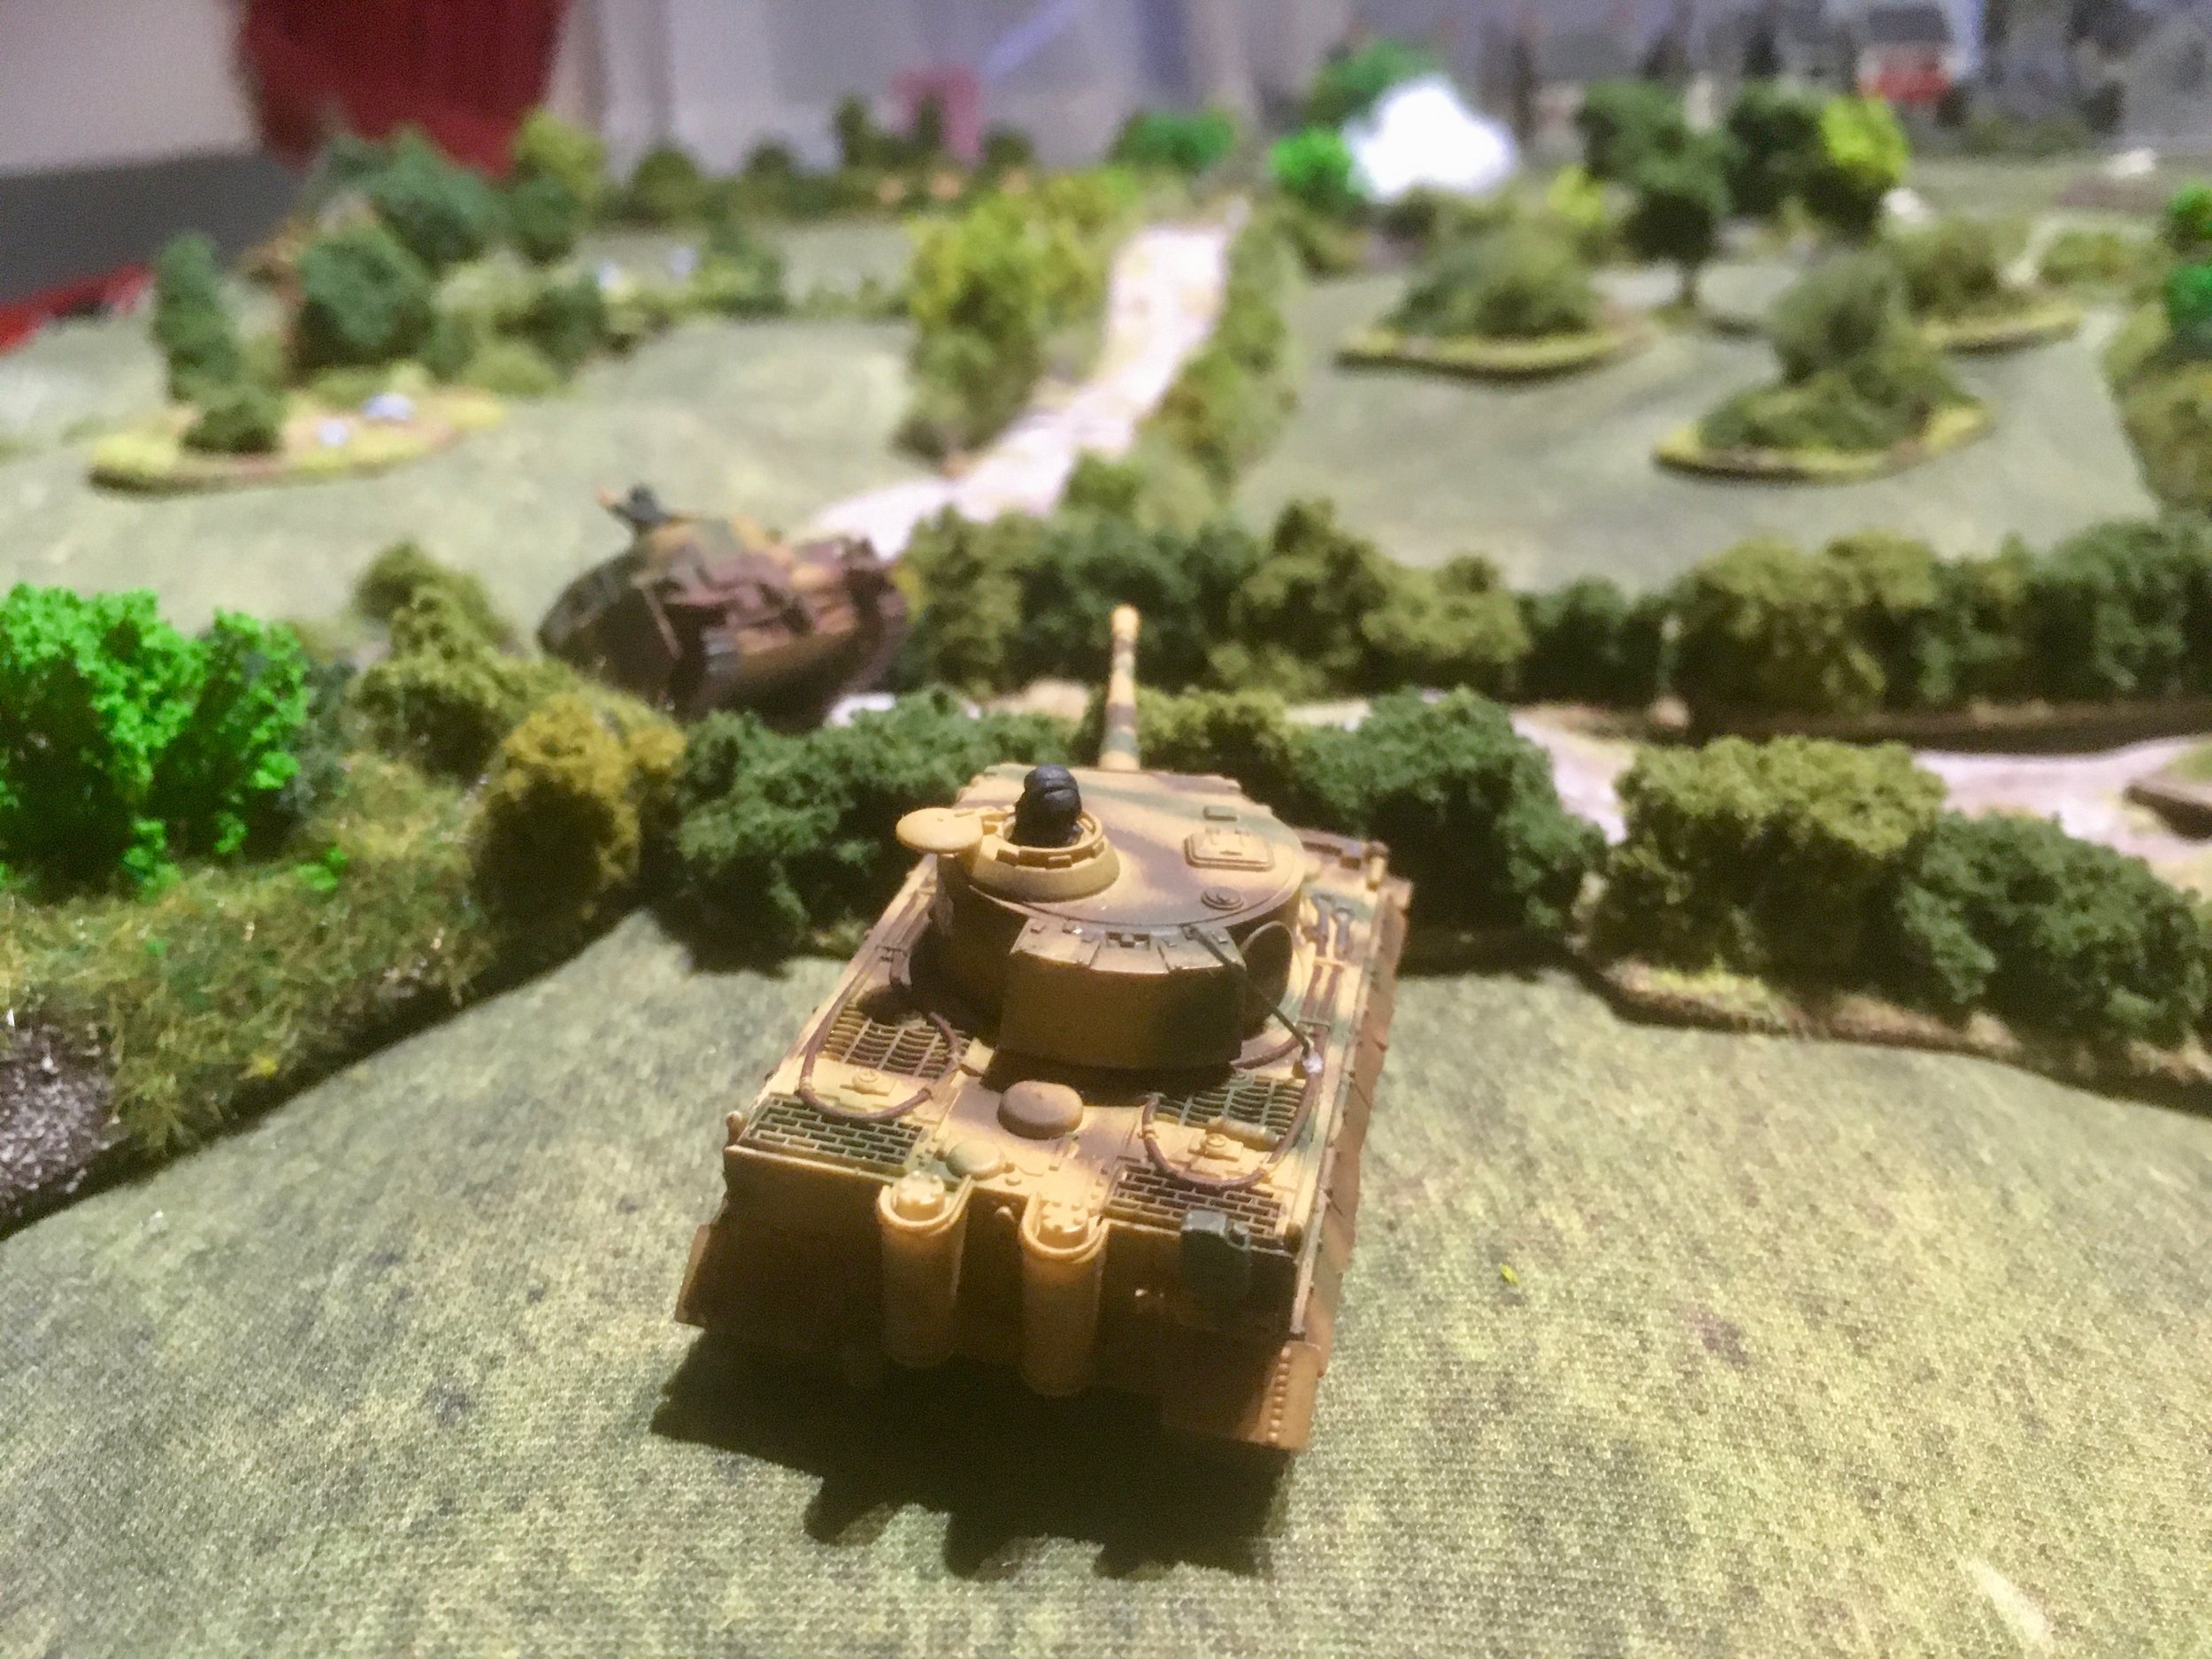 With the Panzer IV's proving to be easy meat for the British, it was time for the heavy guns...